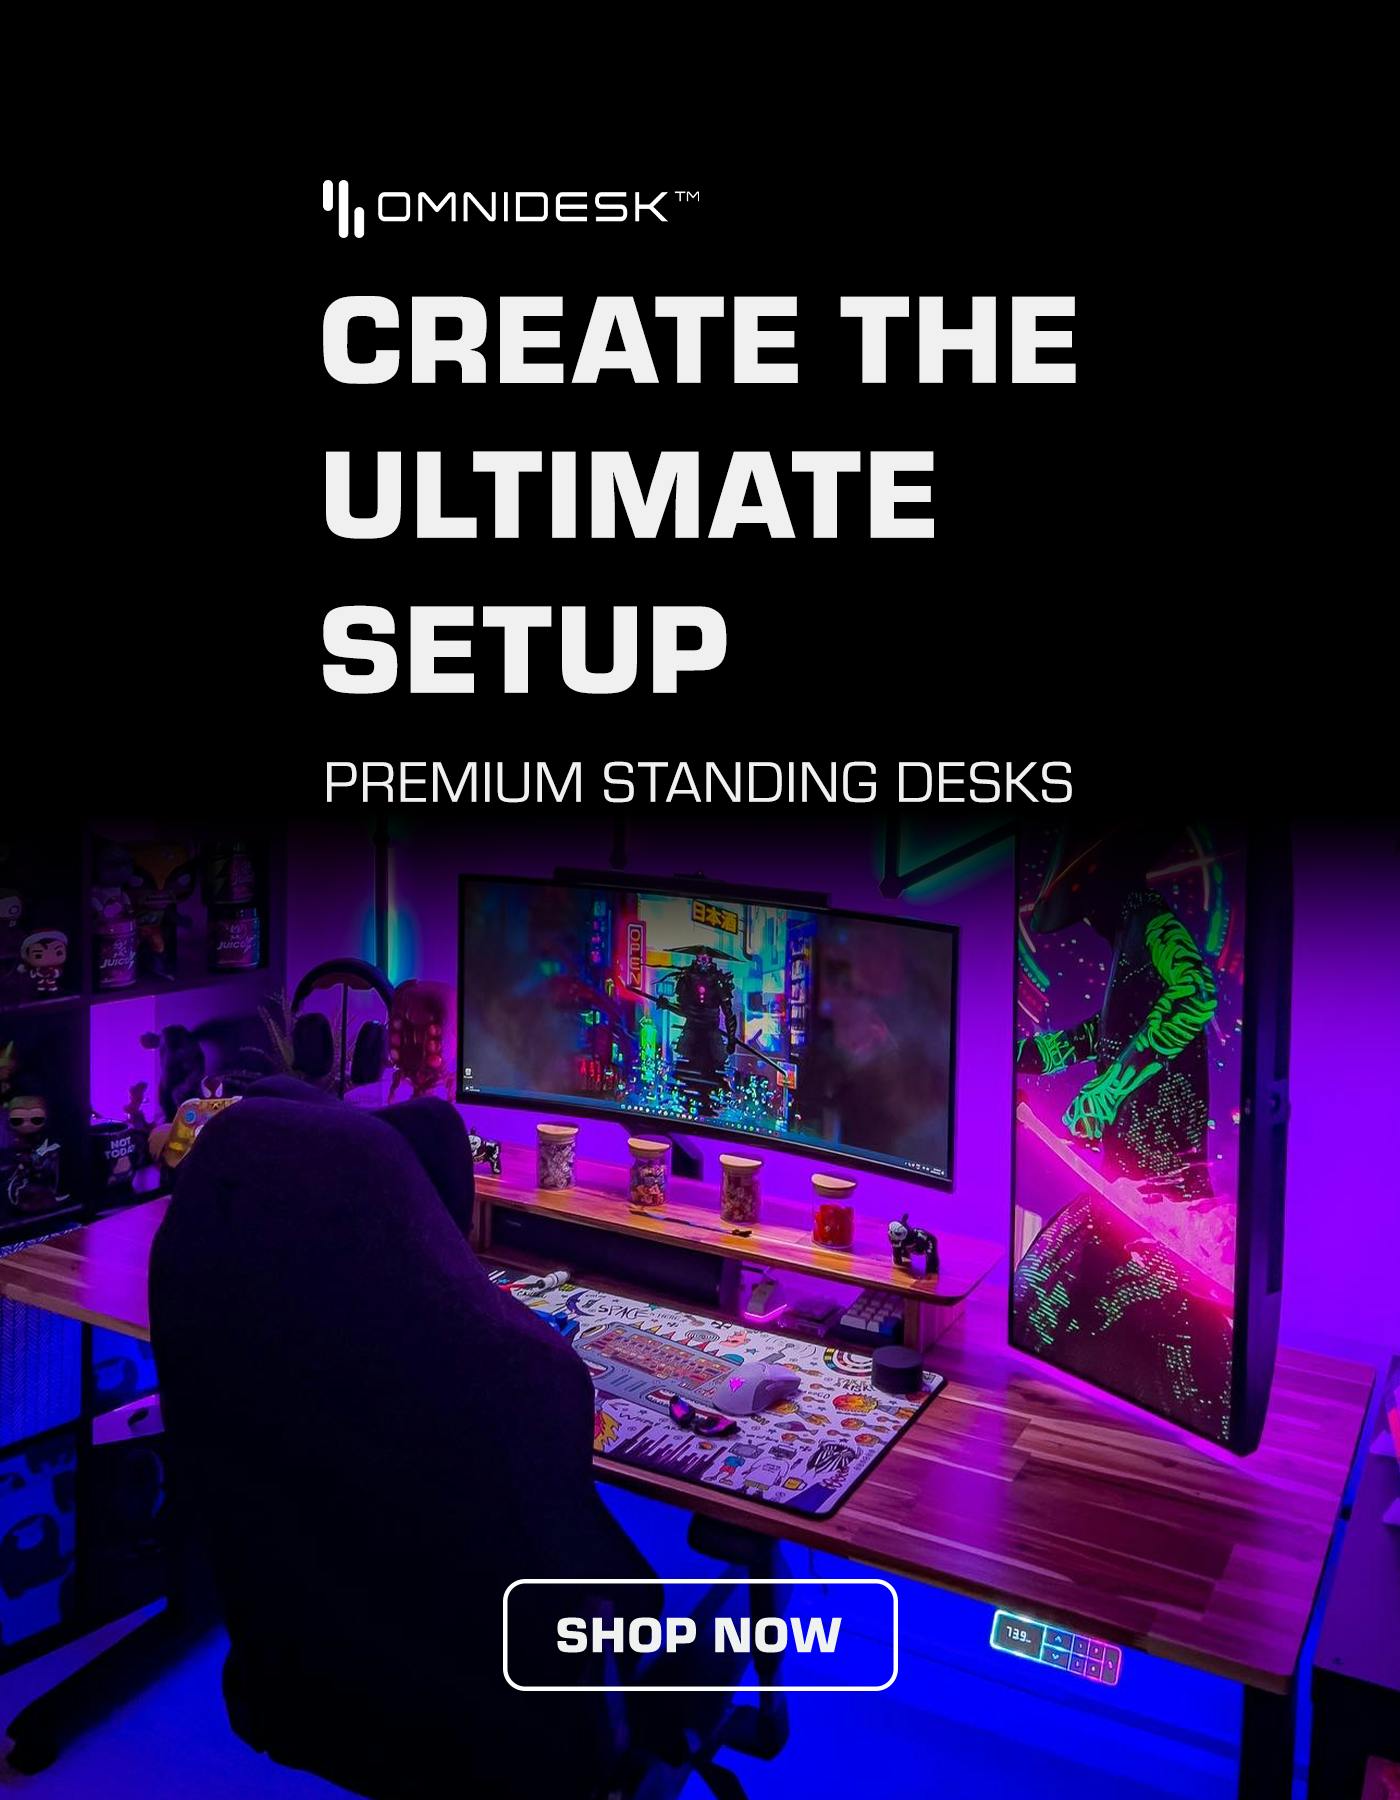 How to create the perfect gaming laptop setup